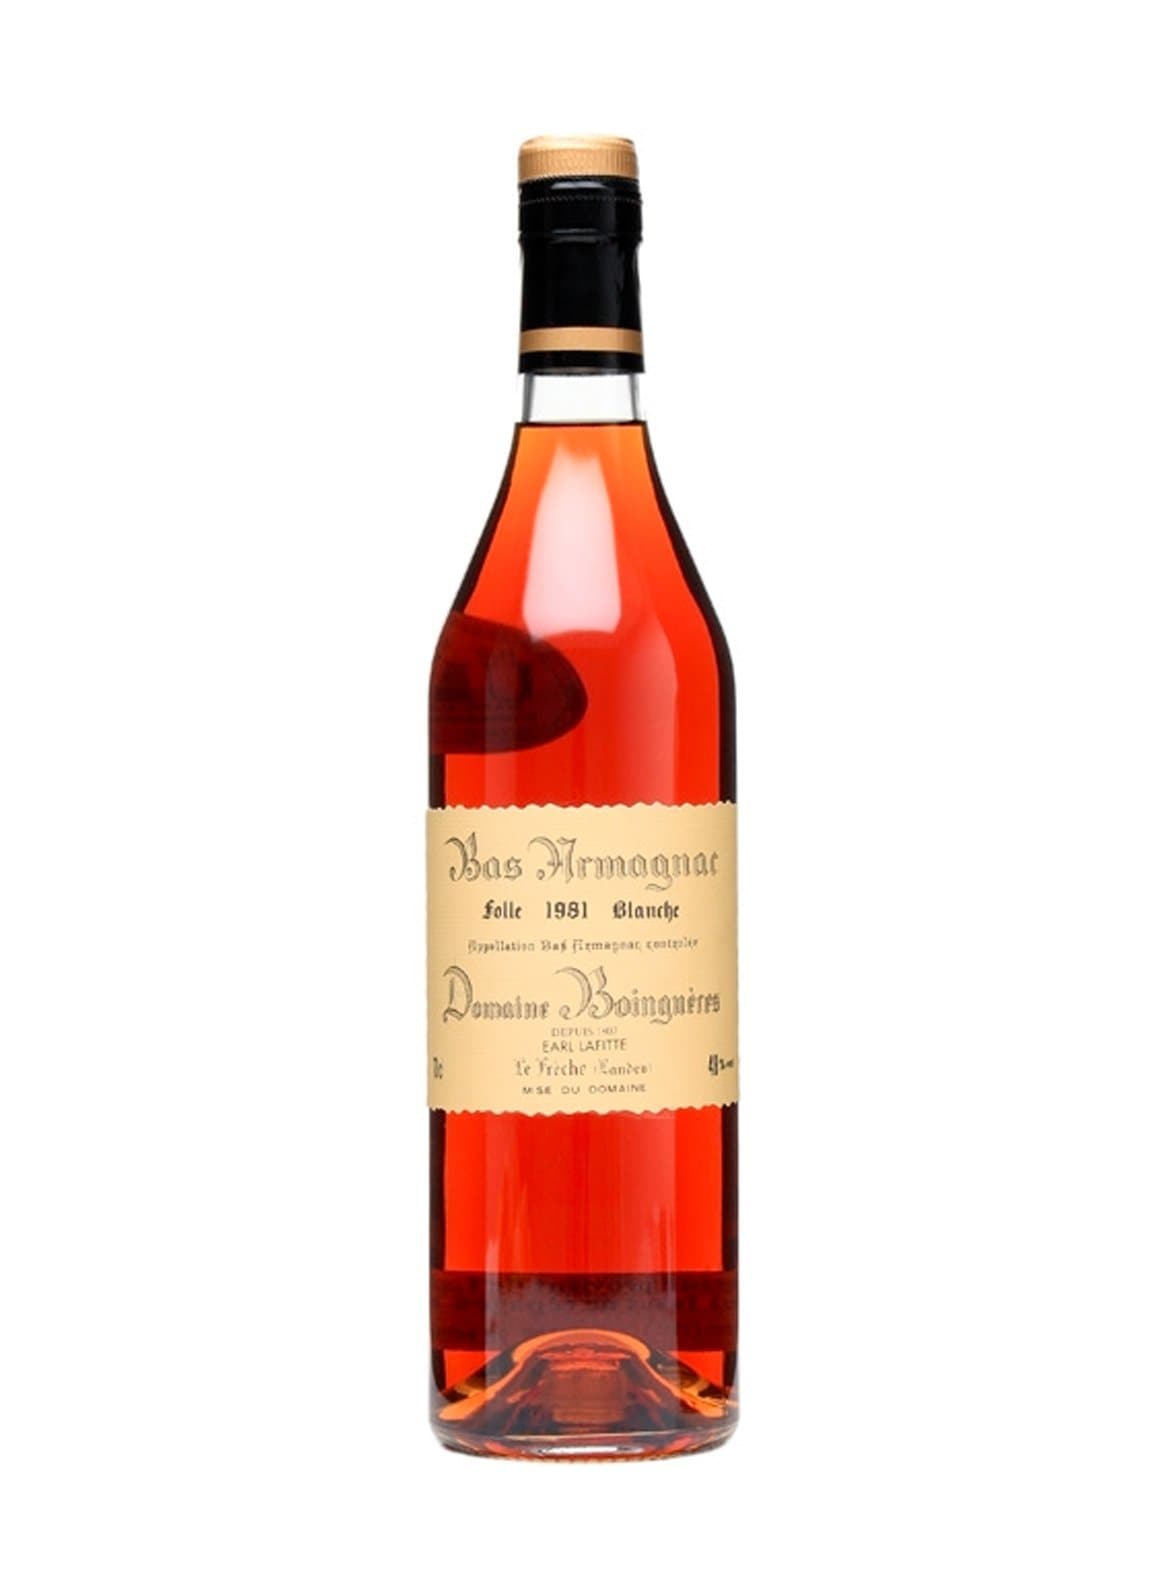 Domaine Boingneres 1981 Folle Blanche Grand Bas Armagnac 48% 700ml | Brandy | Shop online at Spirits of France